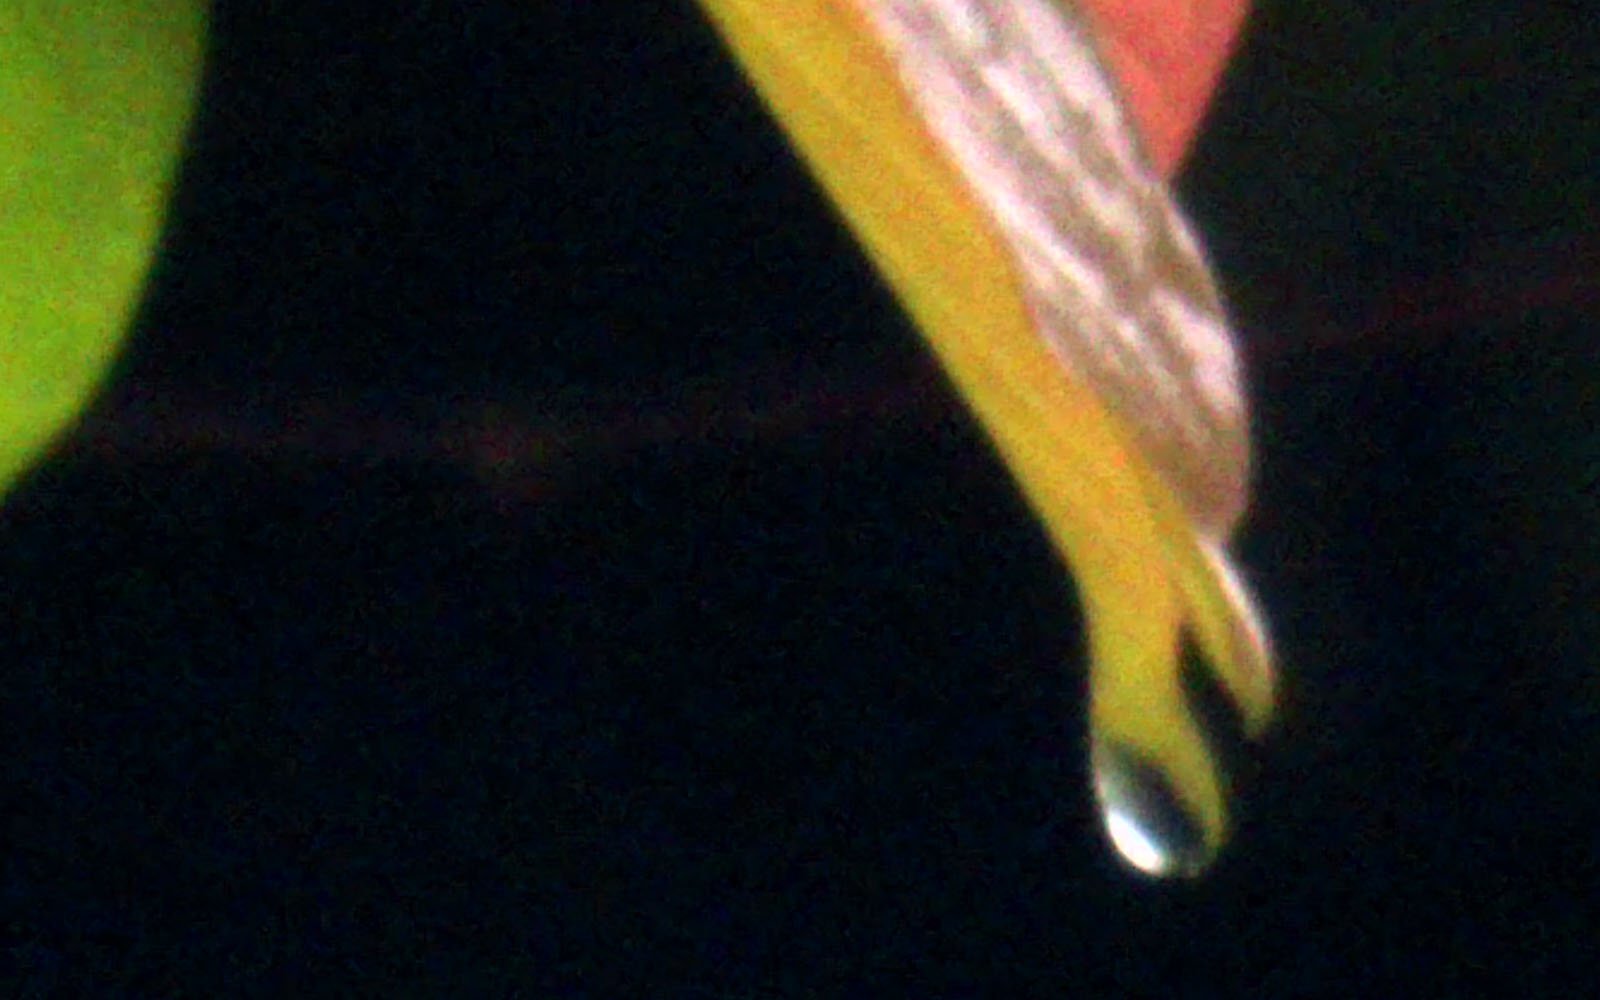 Close-up of a water droplet about to fall from the tip of a colorful flower petal, against a dark background. the droplet is clear and reflects light, enhancing its round shape.